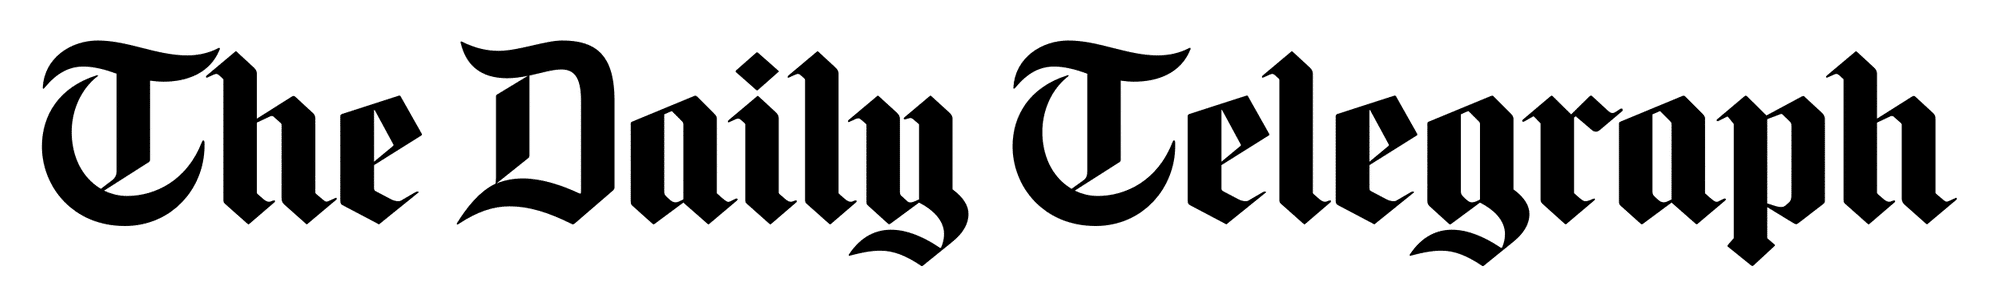 The Daily Telegraph" logo in a black Gothic font on a white background.